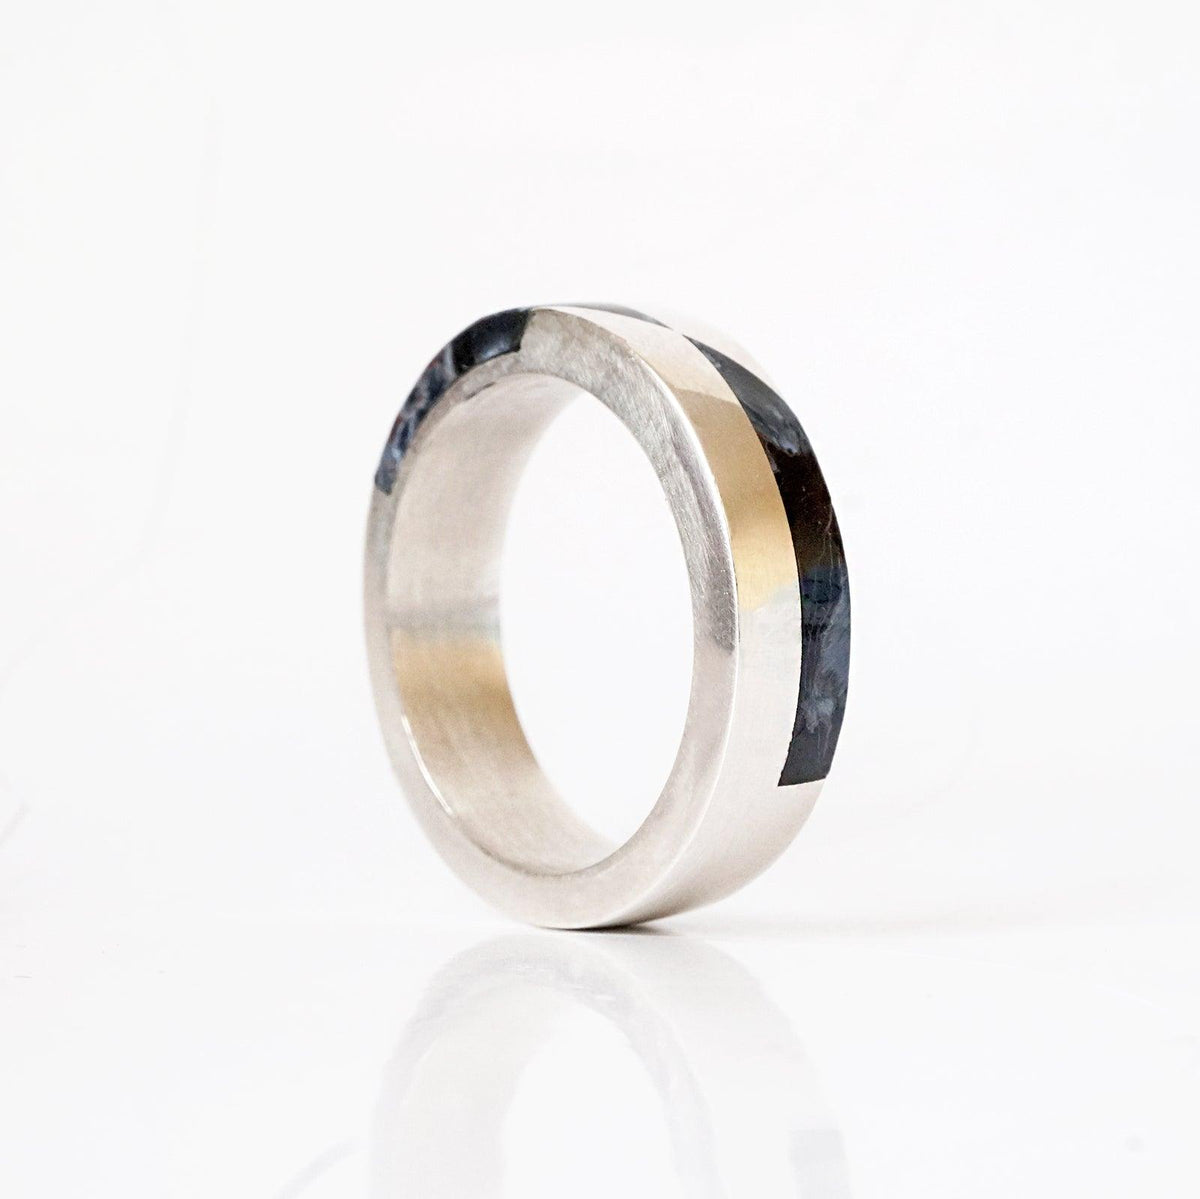 Grid Pietersite Ring in Sterling Silver and 14K Gold, 5.8mm